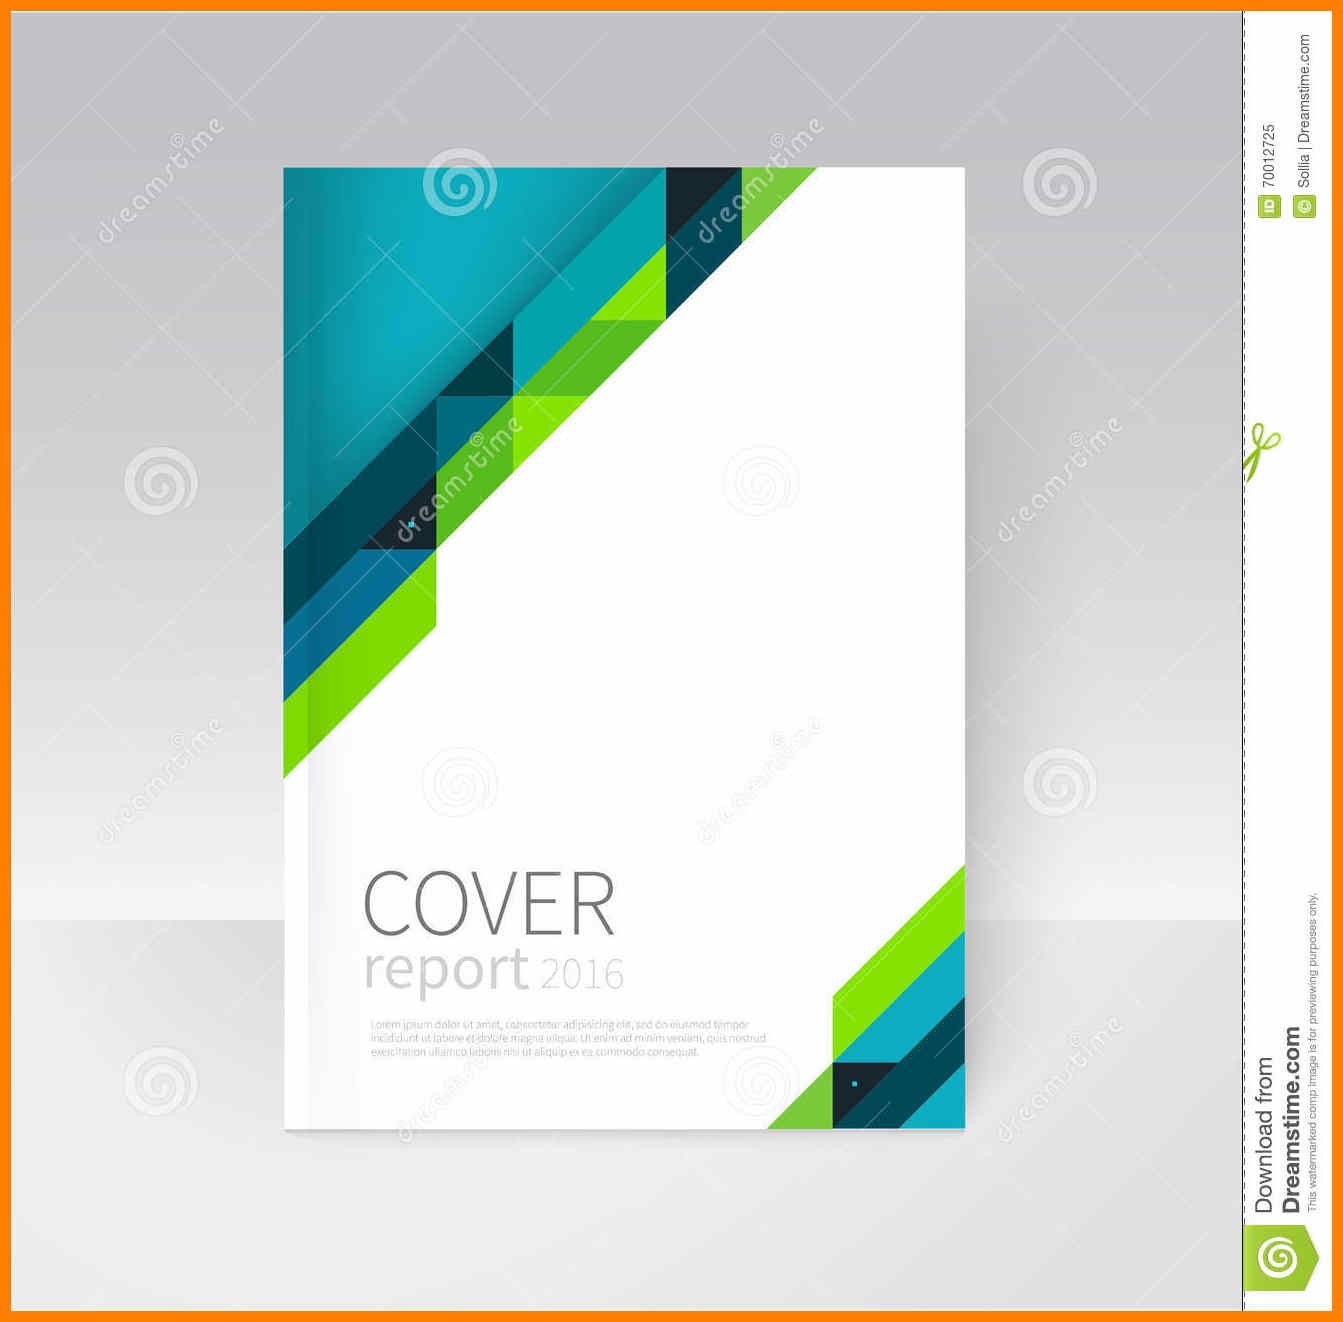 11 Ms Word Cover Page Templates Free Download Unmiser Able Template